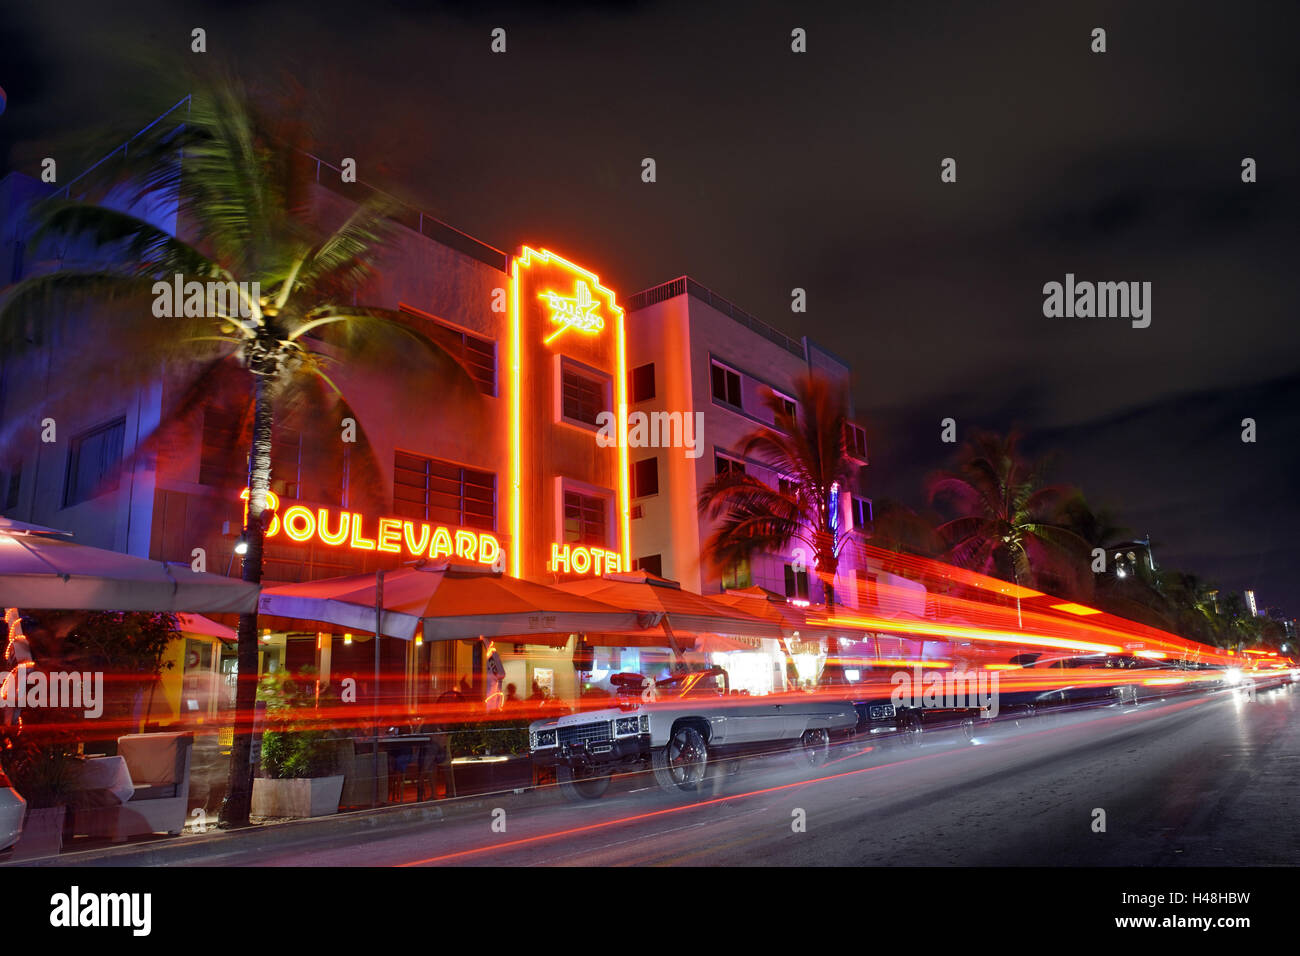 Traffic early in the evening in the kind of Deco fourth, Ocean drive, dusk, Miami South Beach, kind of Deco District, Florida, USA, Stock Photo